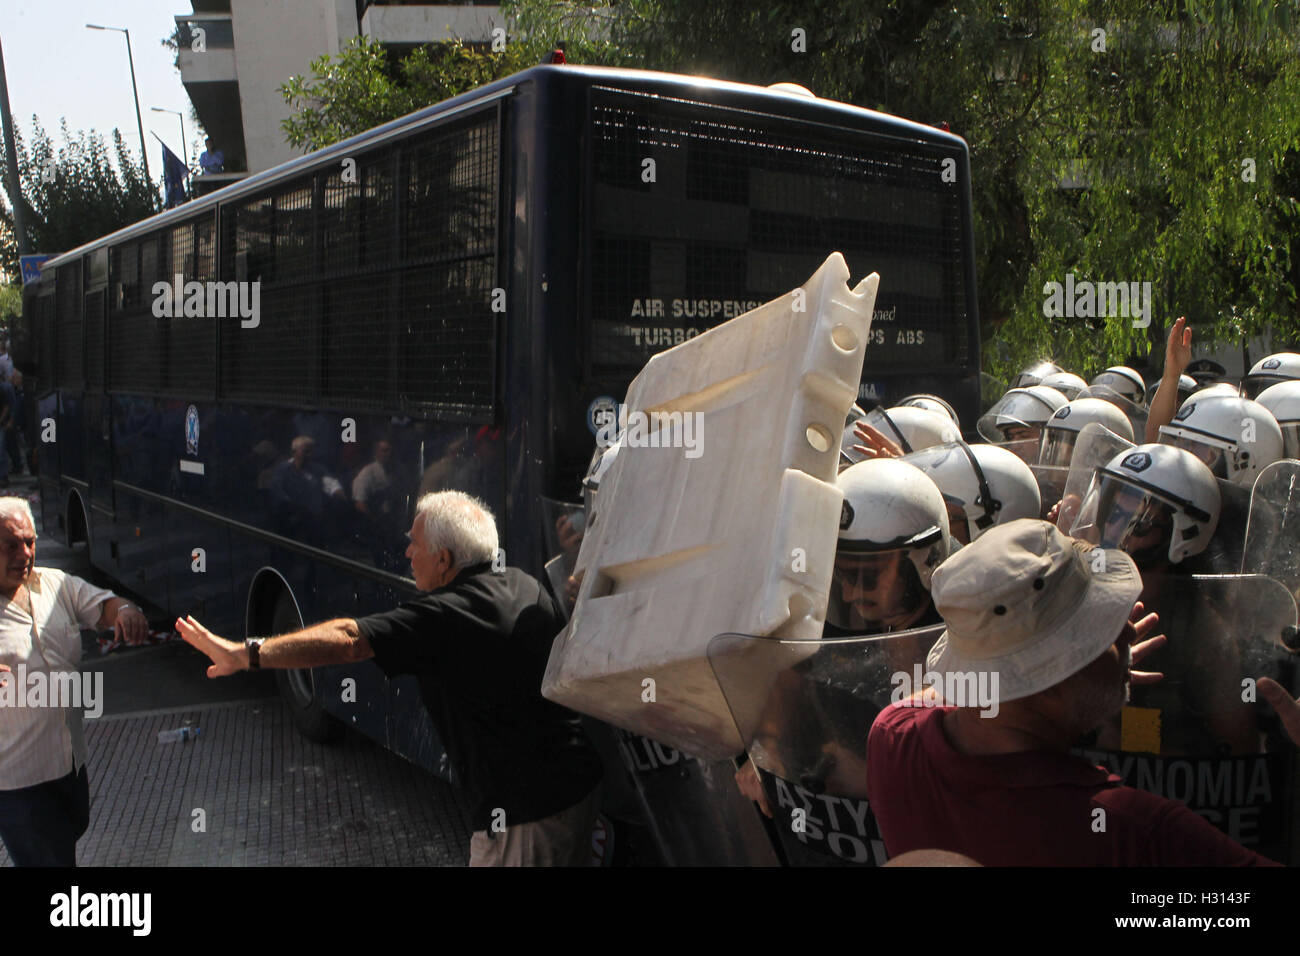 Athens, Greece. 3rd Oct, 2016. Elderly people clash with riot police during anti-austerity protest against pension cuts in central Athens near the prime minister's office. Credit:  Aristidis Vafeiadakis/ZUMA Wire/Alamy Live News Stock Photo